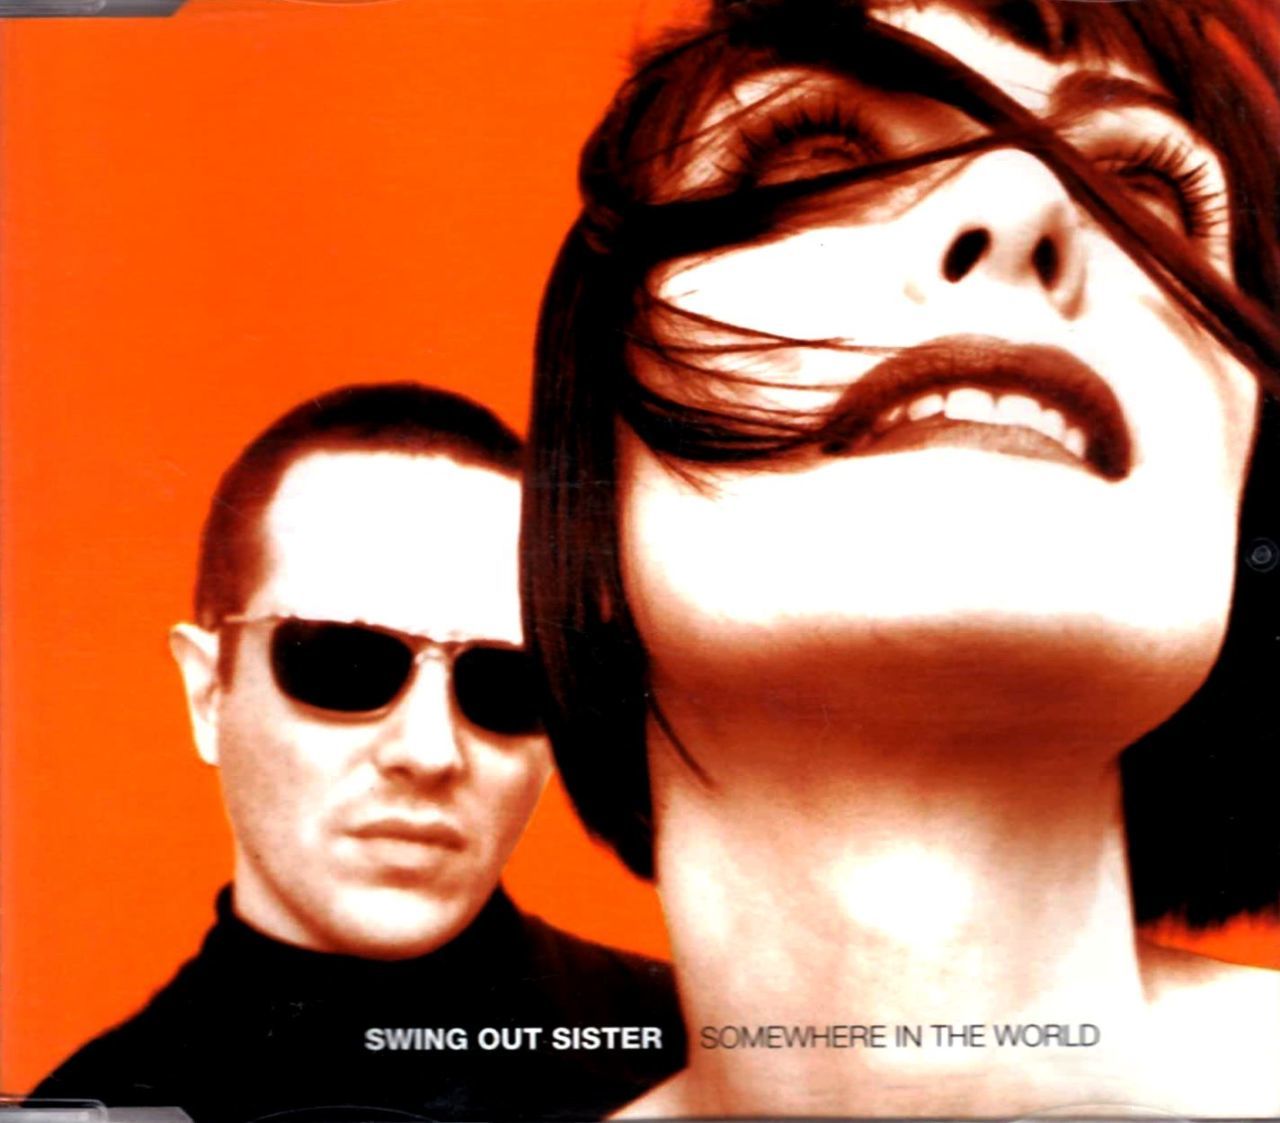 SWING OUT SISTER - SOMEWHERE IN THE WORLD (SINGLE CD)